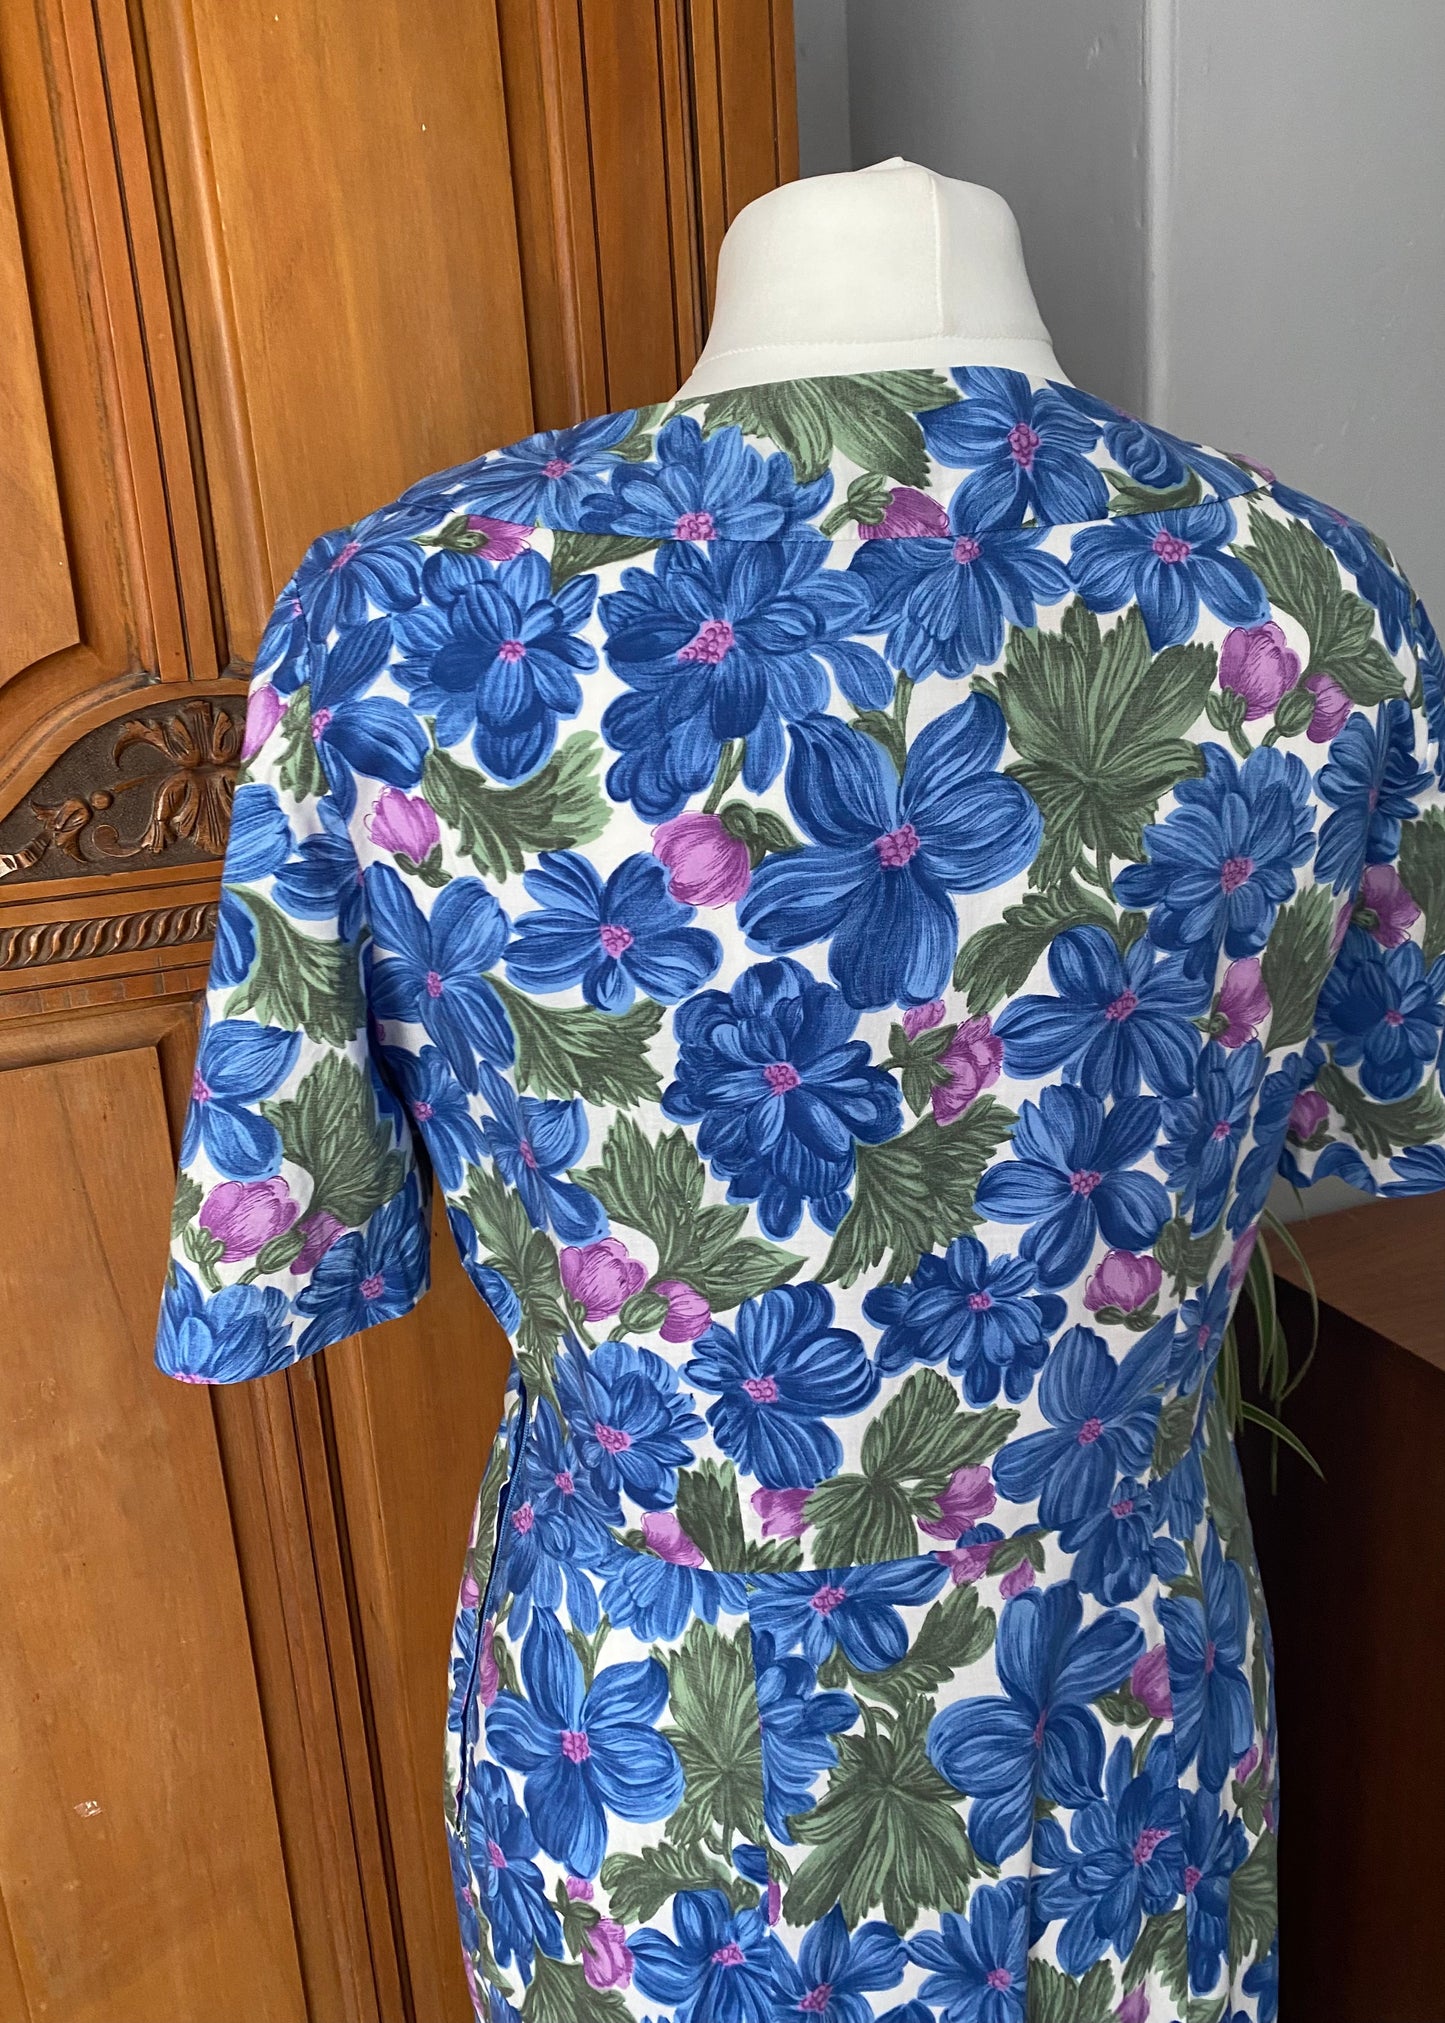 Vintage cotton 50s style blue and purple floral dress. . Approx UK  14-16